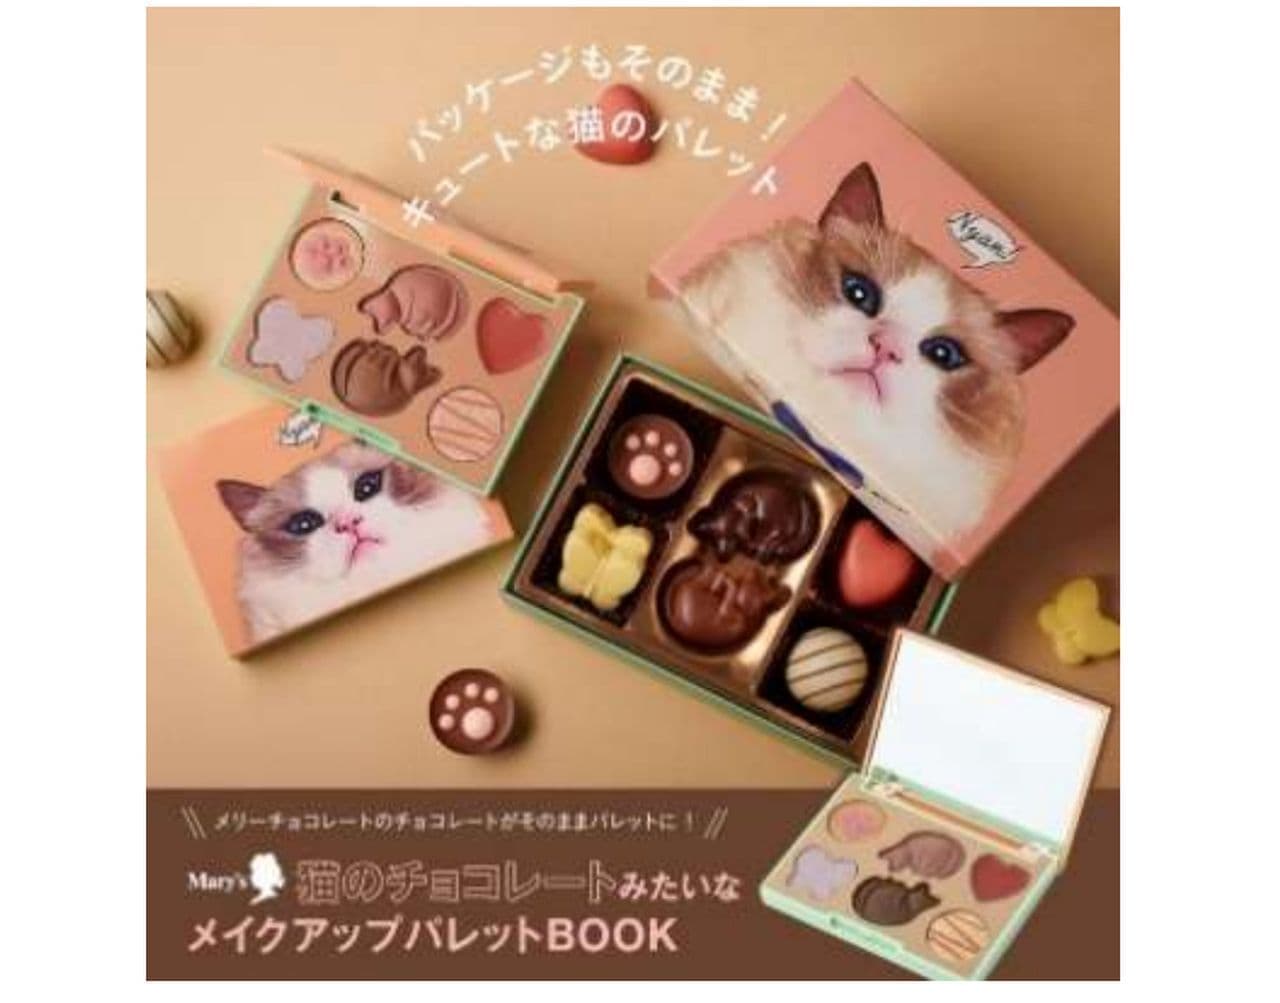 "Mary's Chocolate Cat Makeup Palette BOOK"